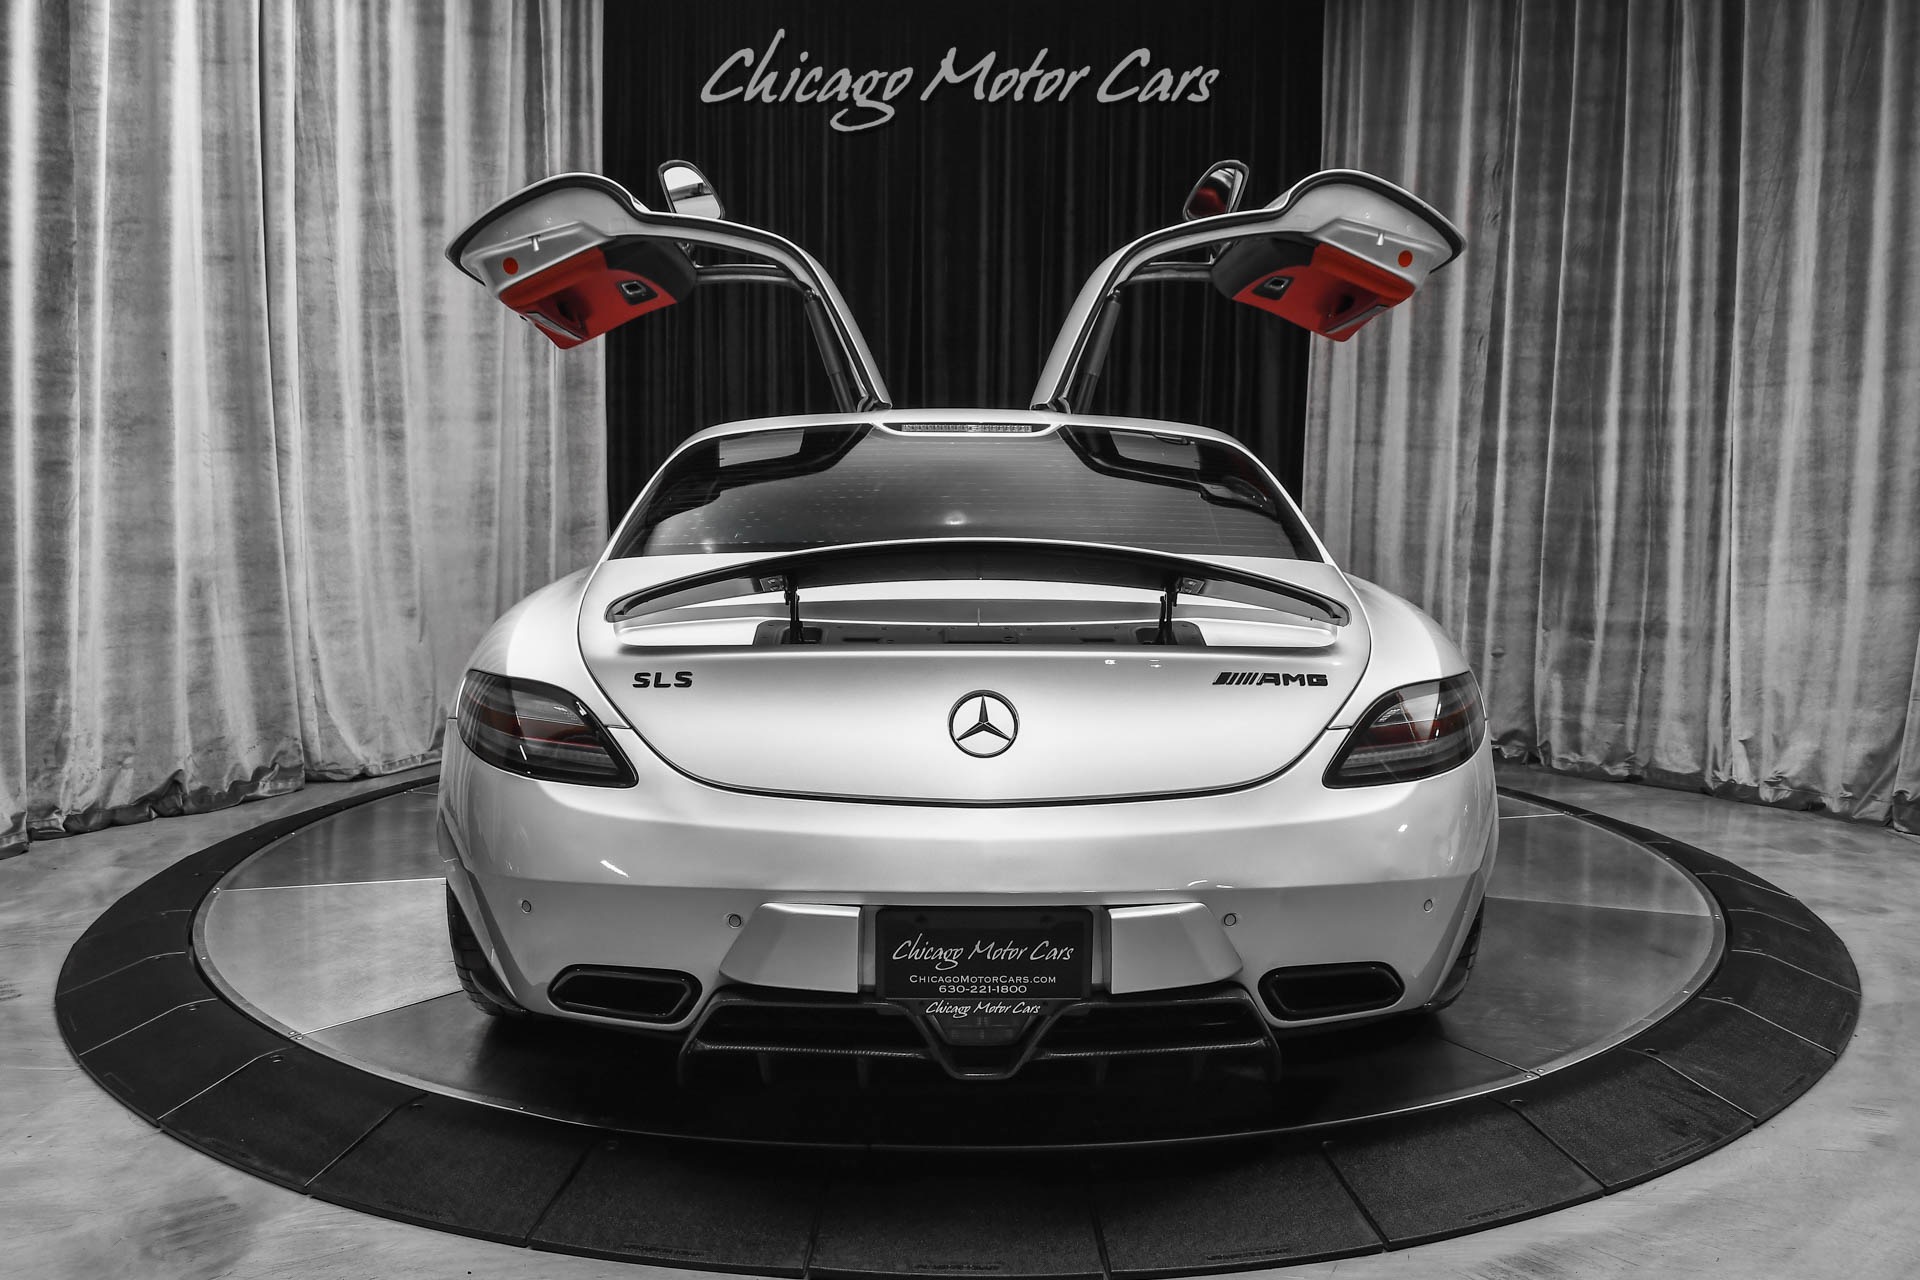 Used-2011-Mercedes-Benz-SLS-AMG-Gullwing-Coupe-RARE-HOT-Spec-TONS-of-Carbon-Fiber-AMG-Suspension